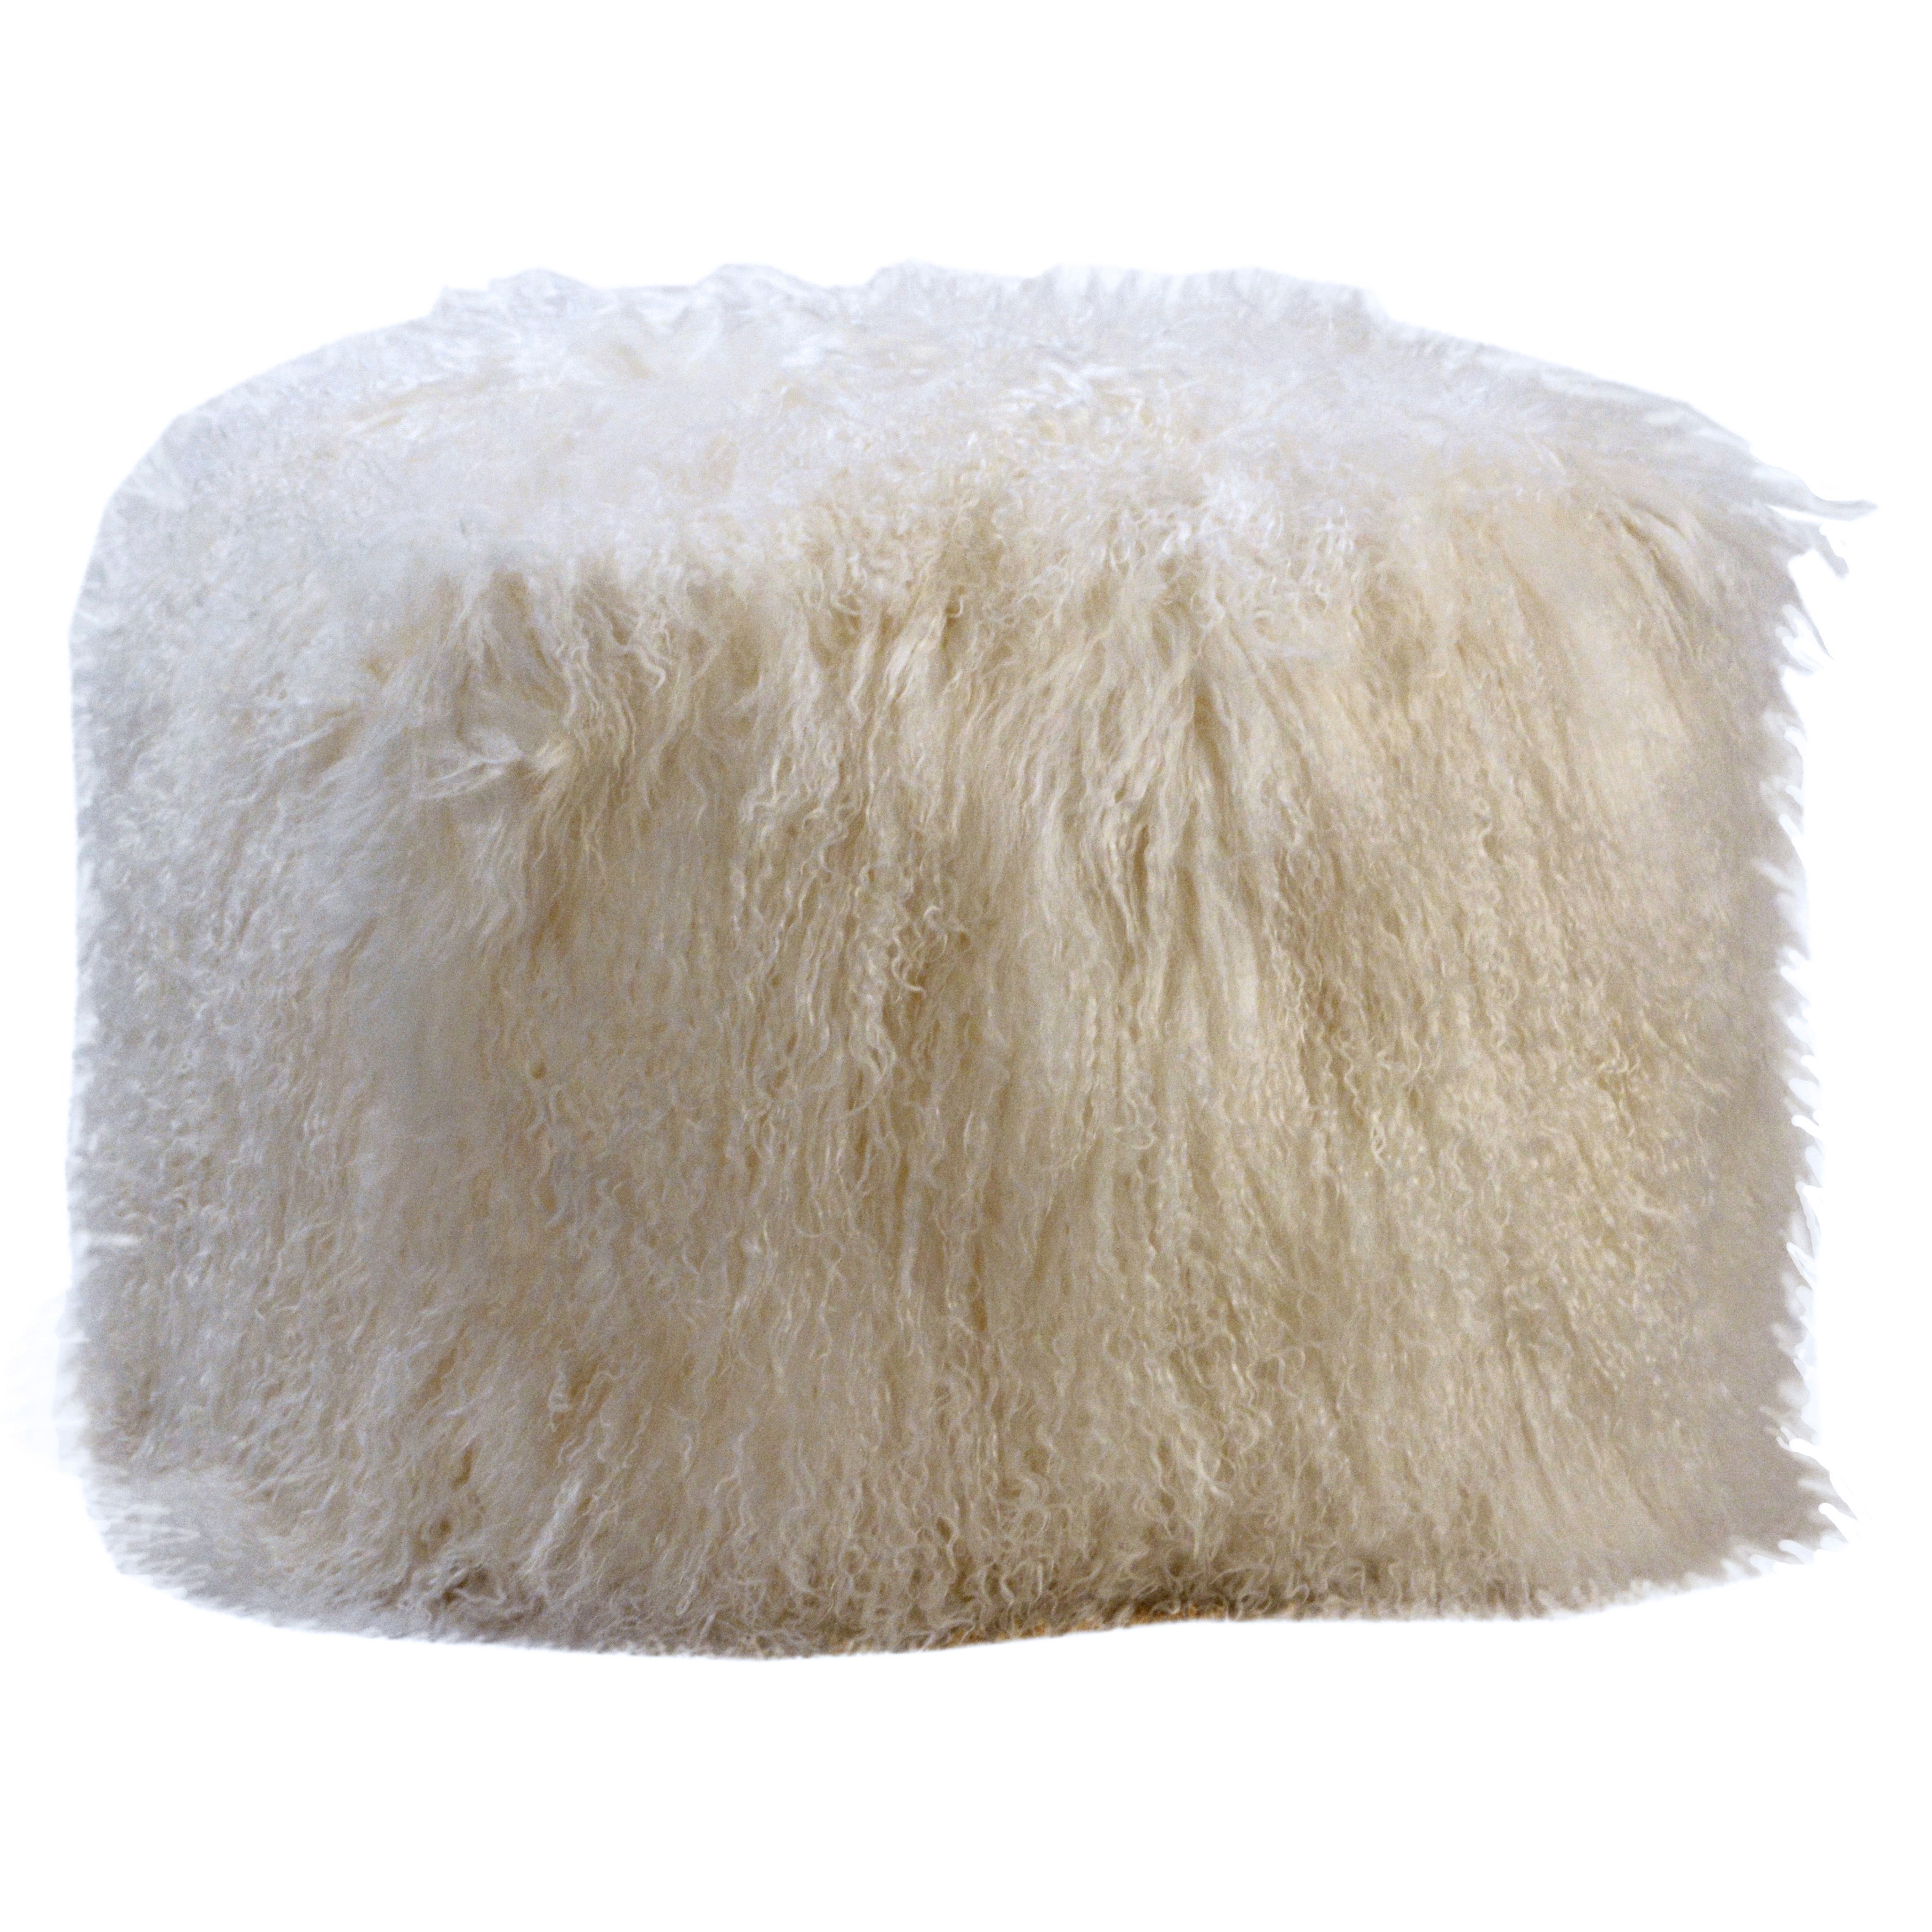 This 18x18” pouf is the perfect complement to any seating arrangement, bringing beautiful texture and natural charm at any part of your home. Wrapped entirely using 100% lamb fur in a stunning natural white color. This pouf offers superior softness and comfort while delivering an inviting feel to your guests.Depth : 18 in Amethyst Home provides interior design, new home construction design consulting, vintage area rugs, and lighting in the Newport Beach metro area.